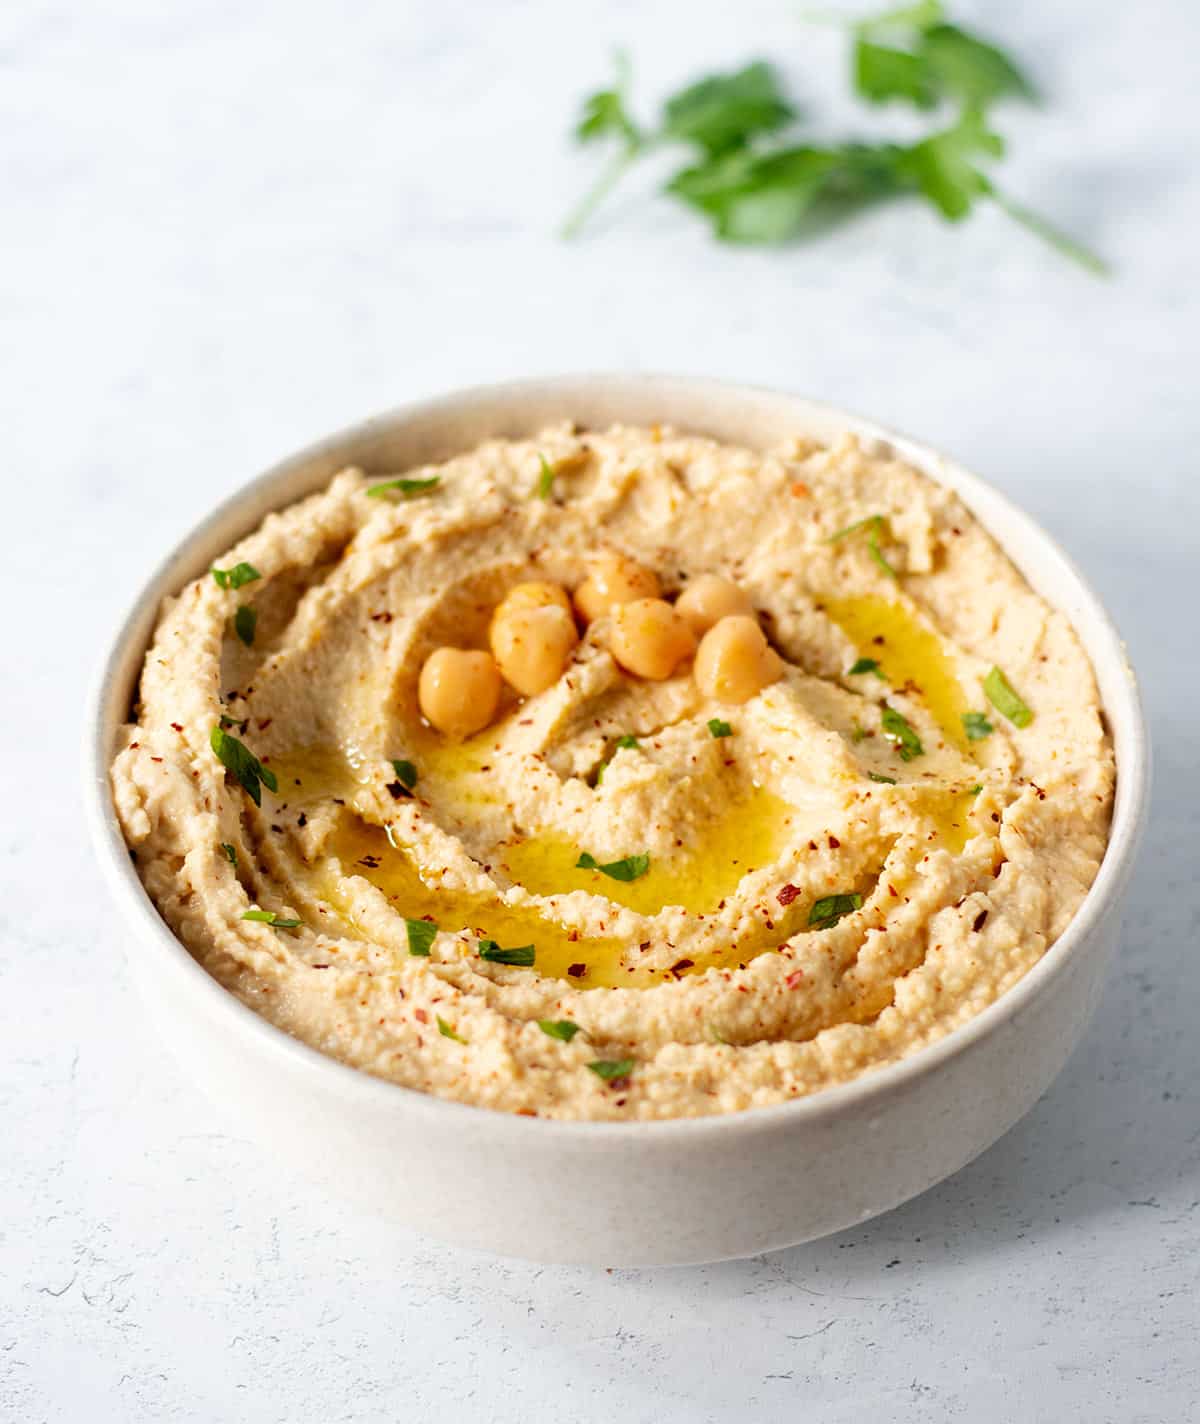 roasted garlic hummus in a white bowl garnished with fresh chopped parsley, chickpeas, olive oil and red chili pepper flakes.